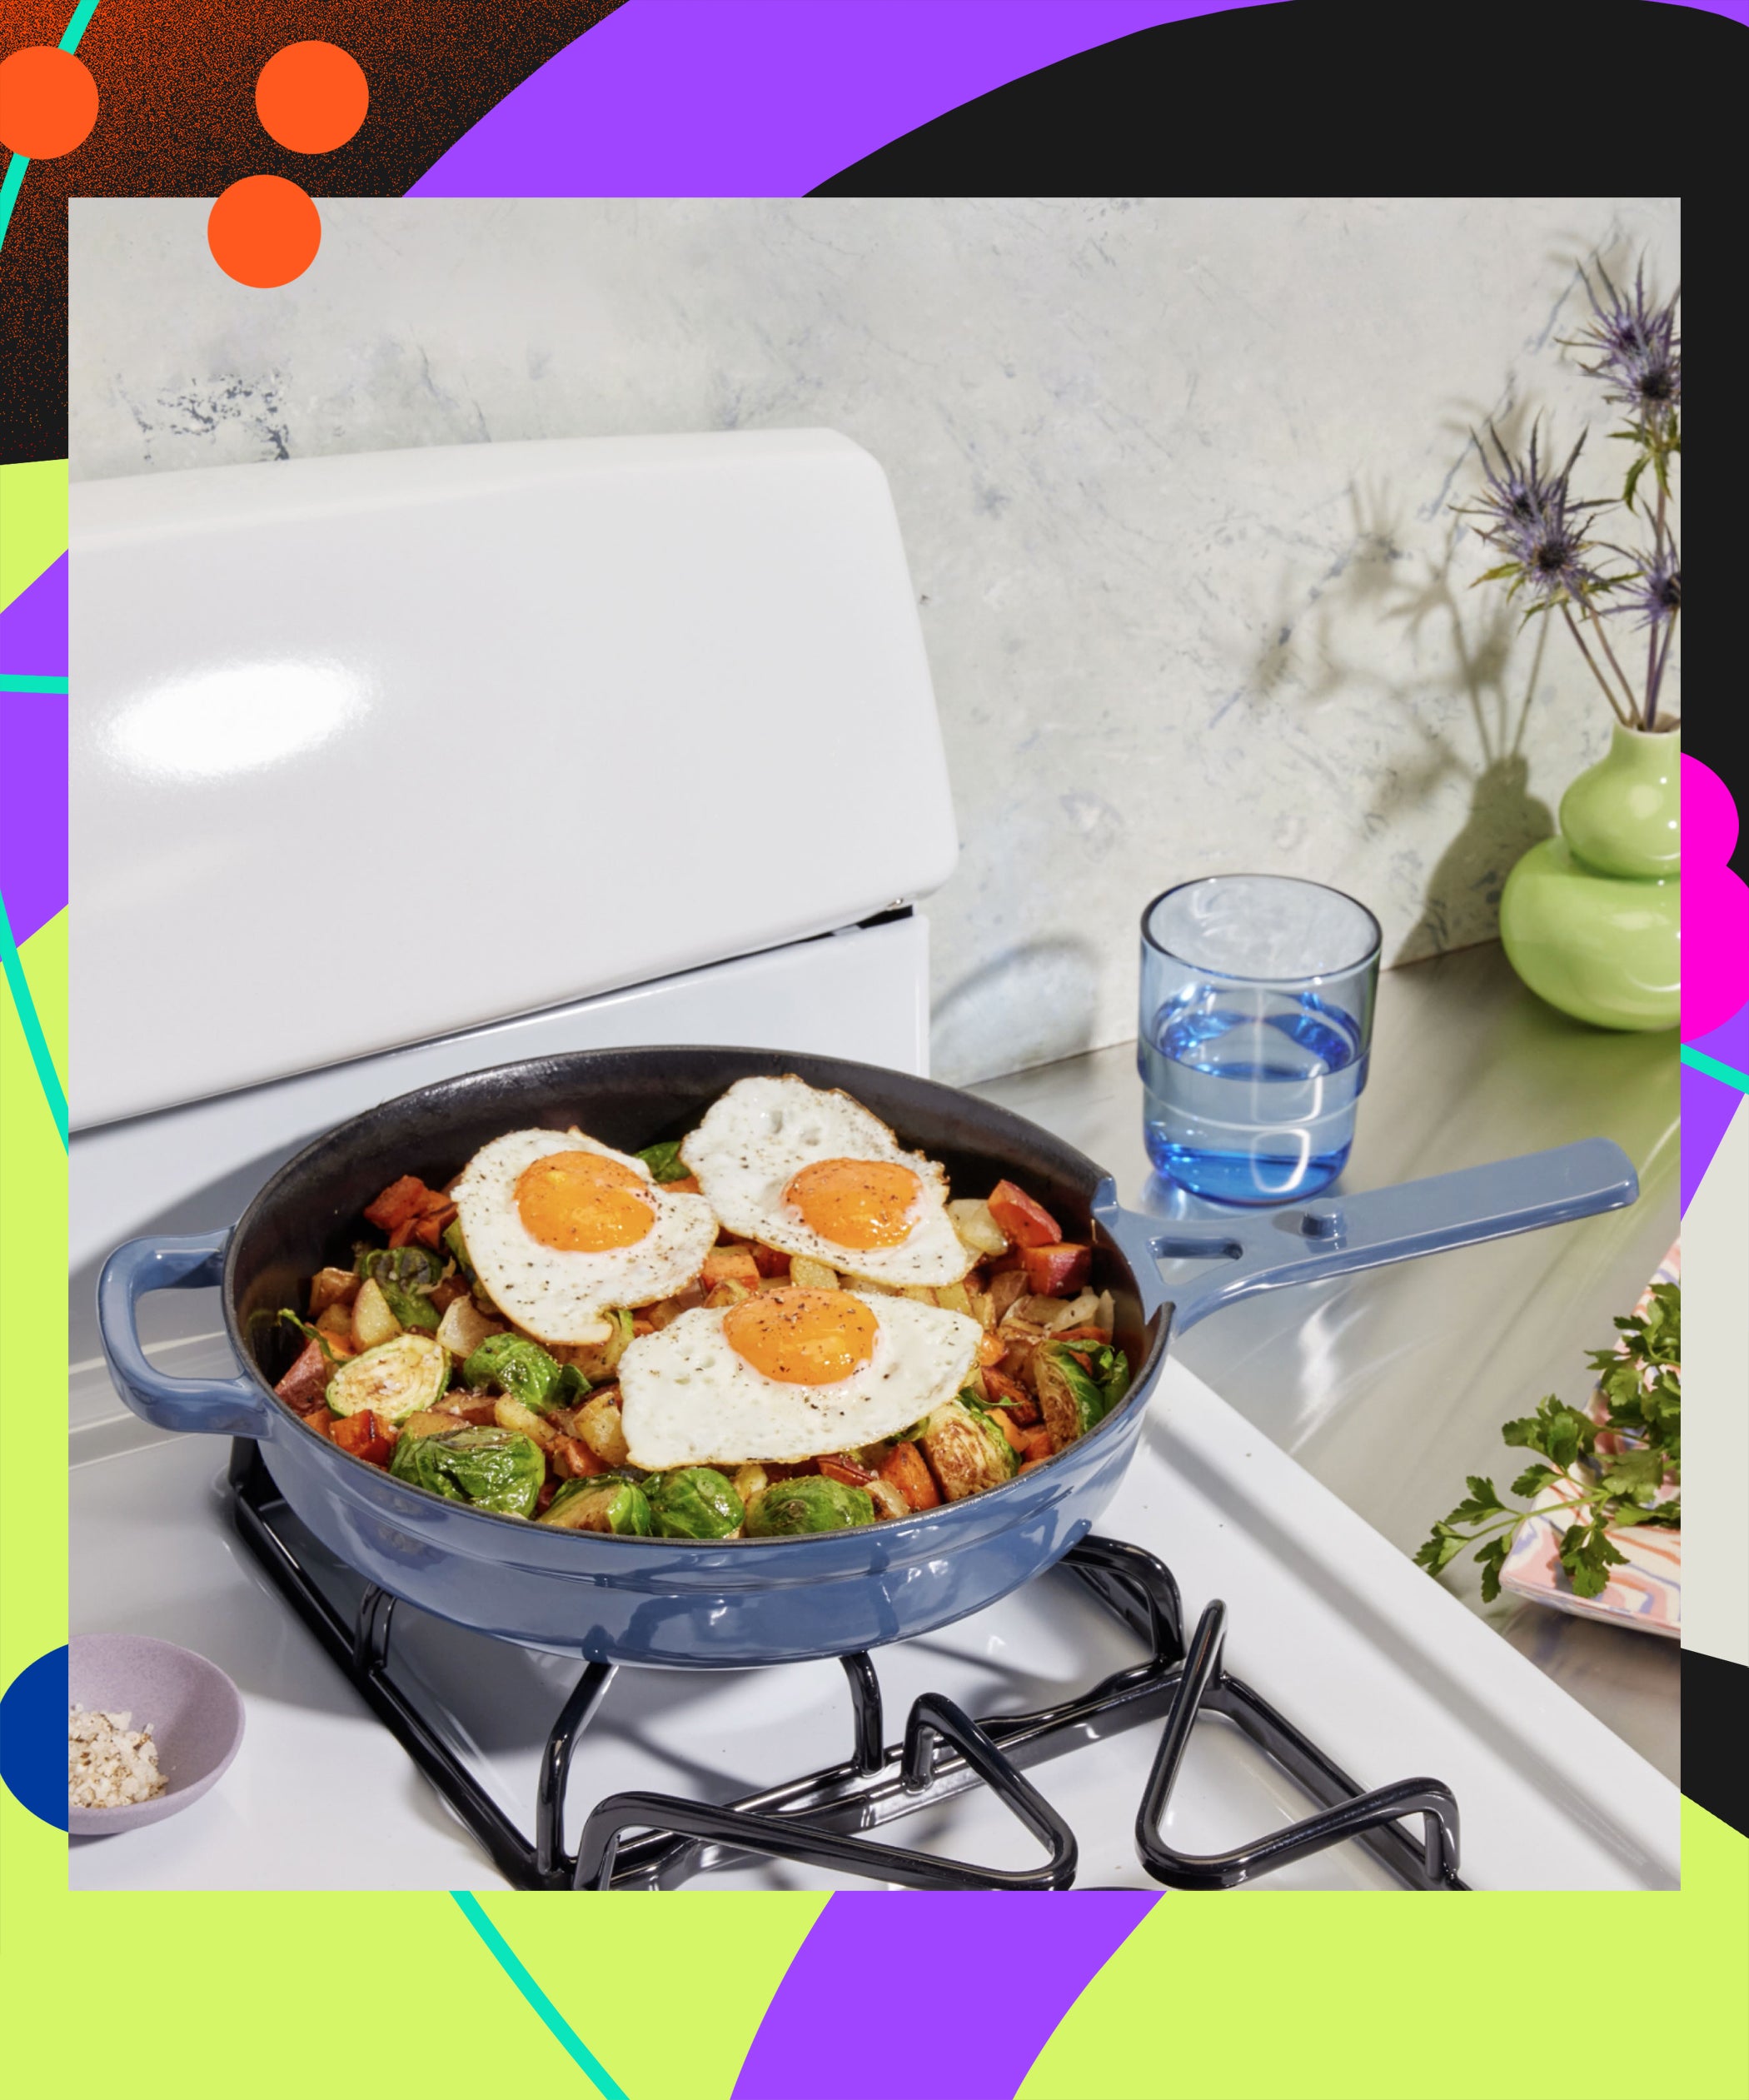 Our Place Just Launched a Cast Iron Grill Pan That's Perfect for